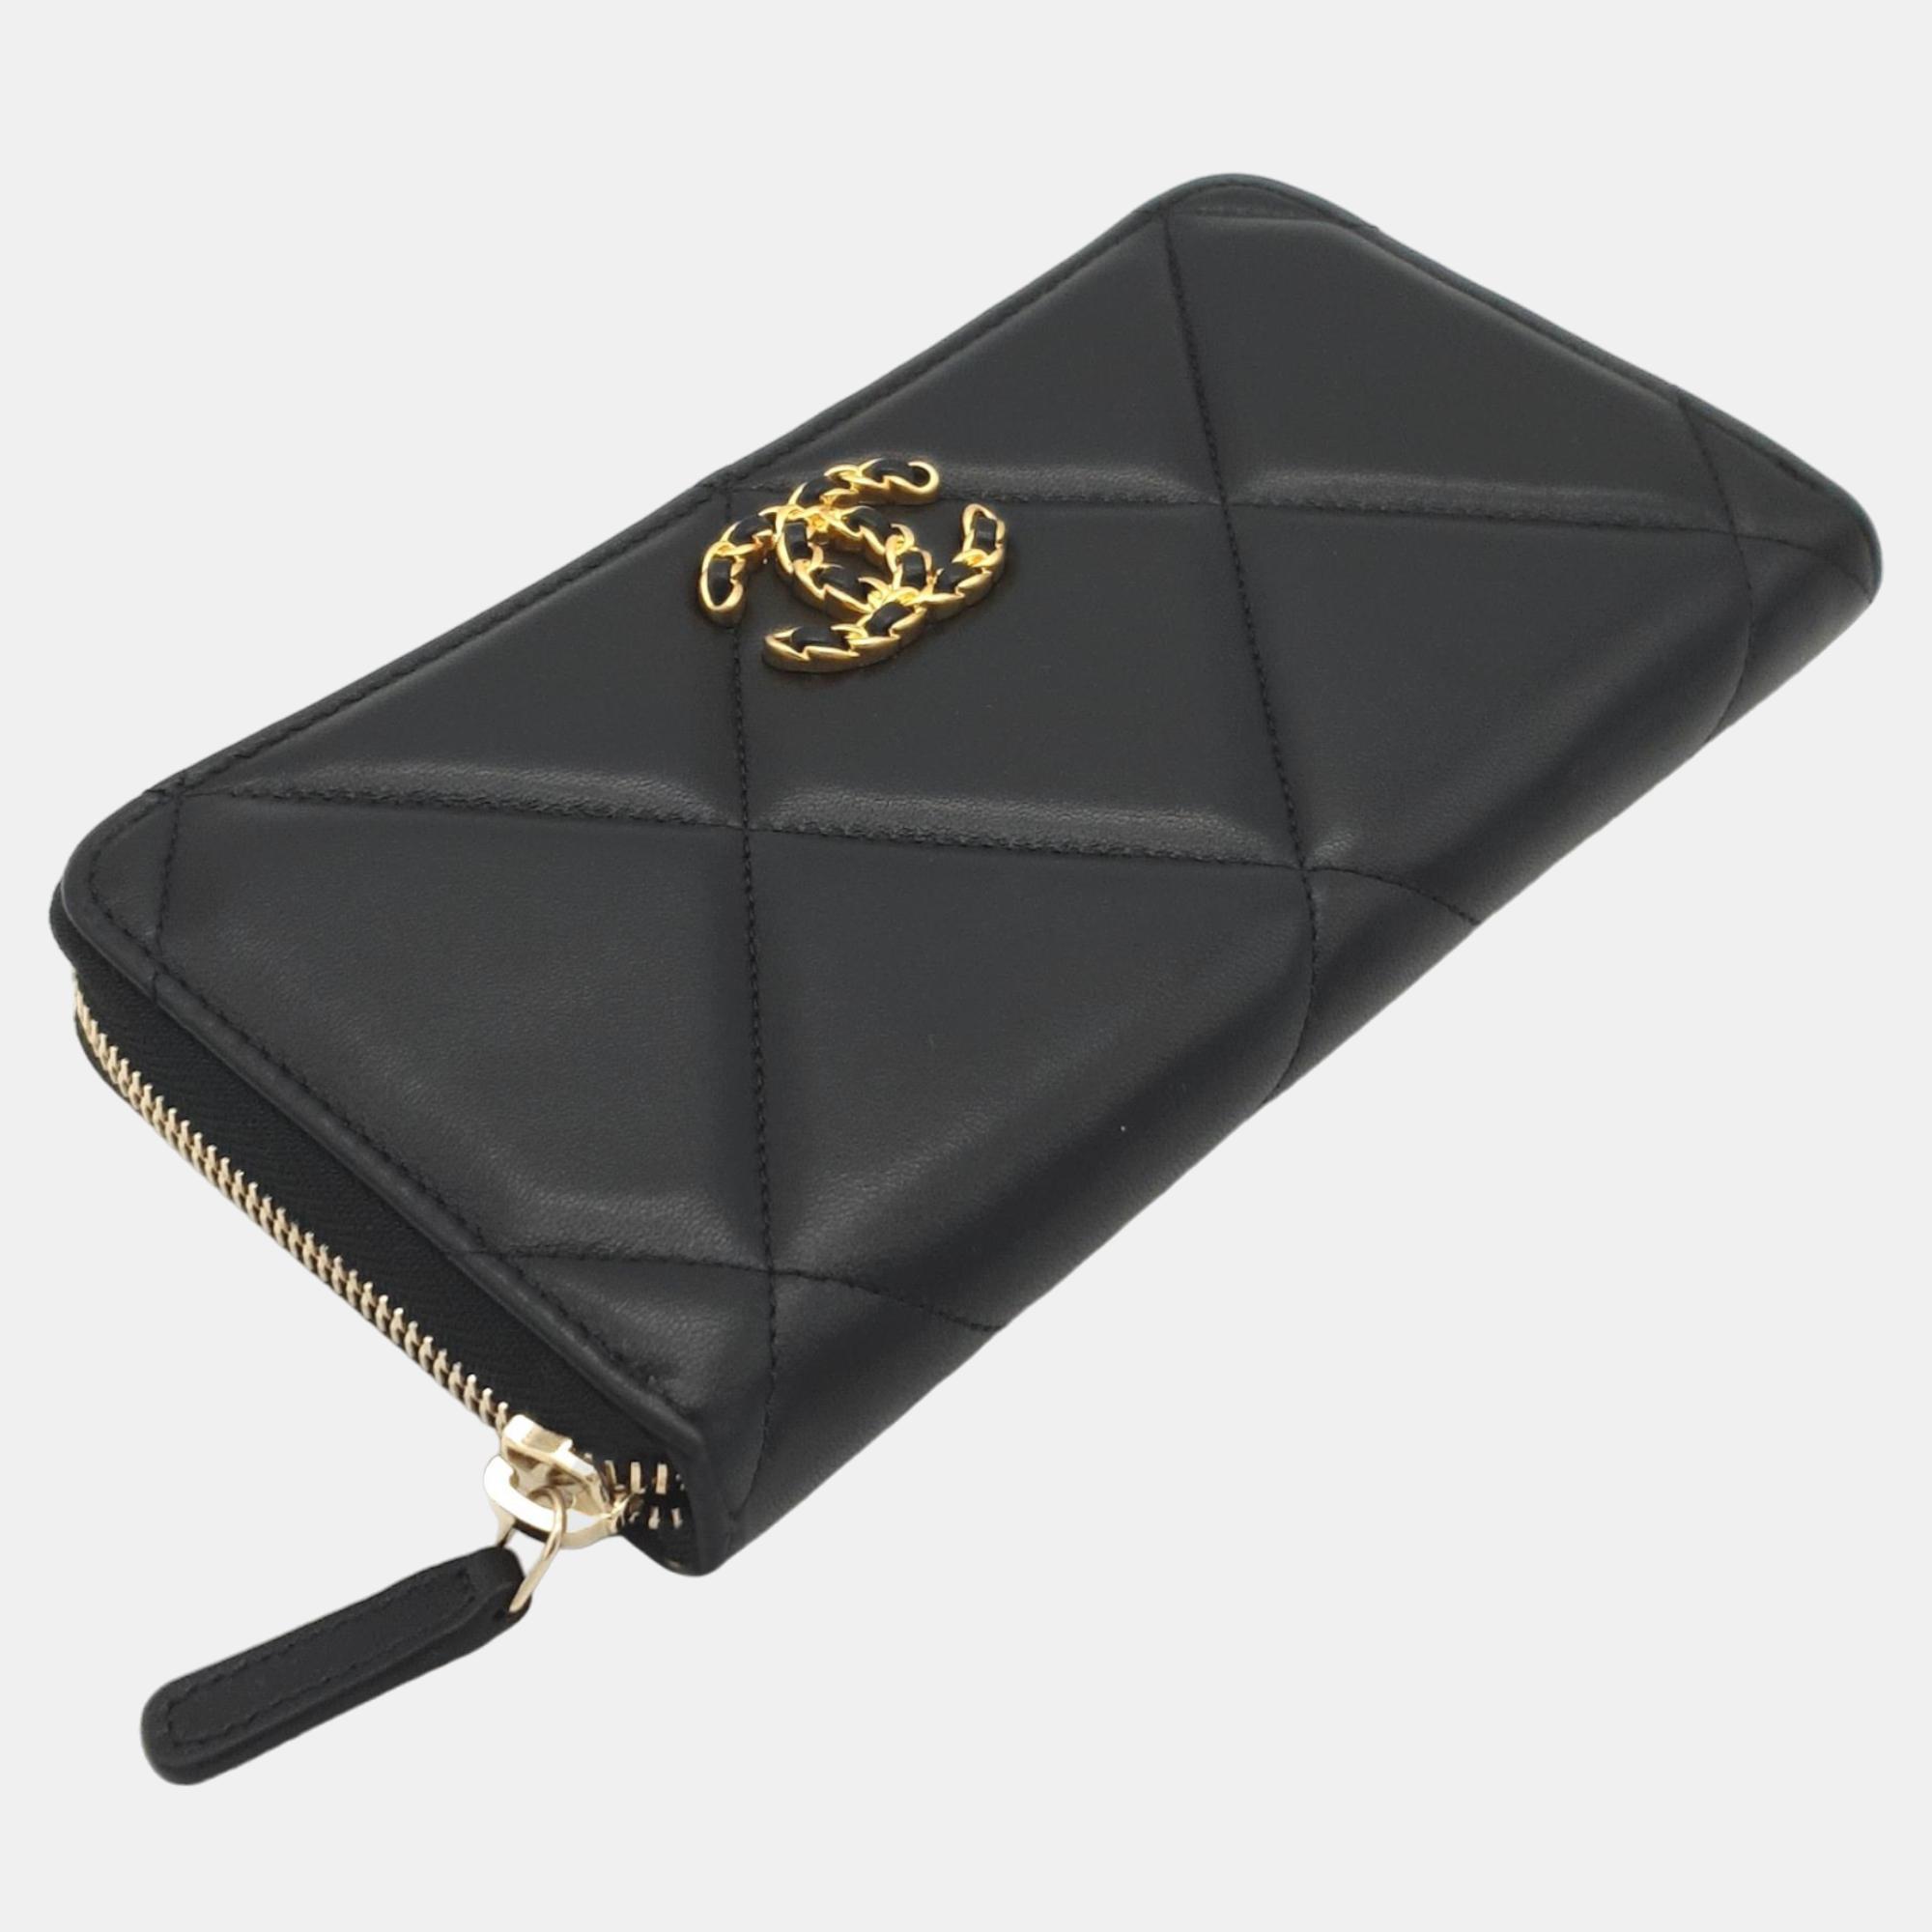 Chanel Black Leather 19 Continental Wallet